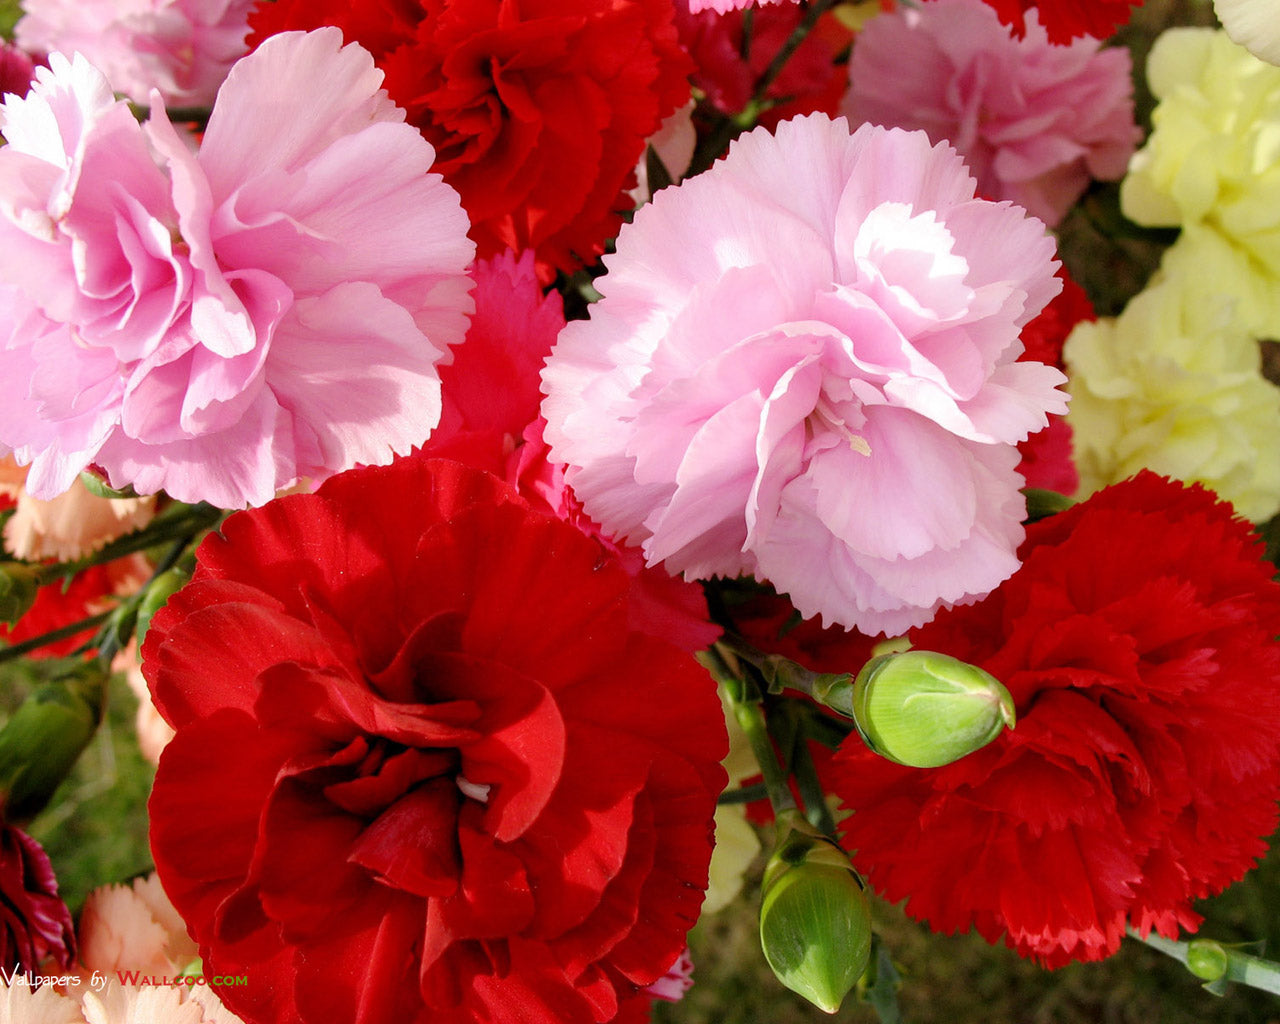 Red and pink carnation bunches